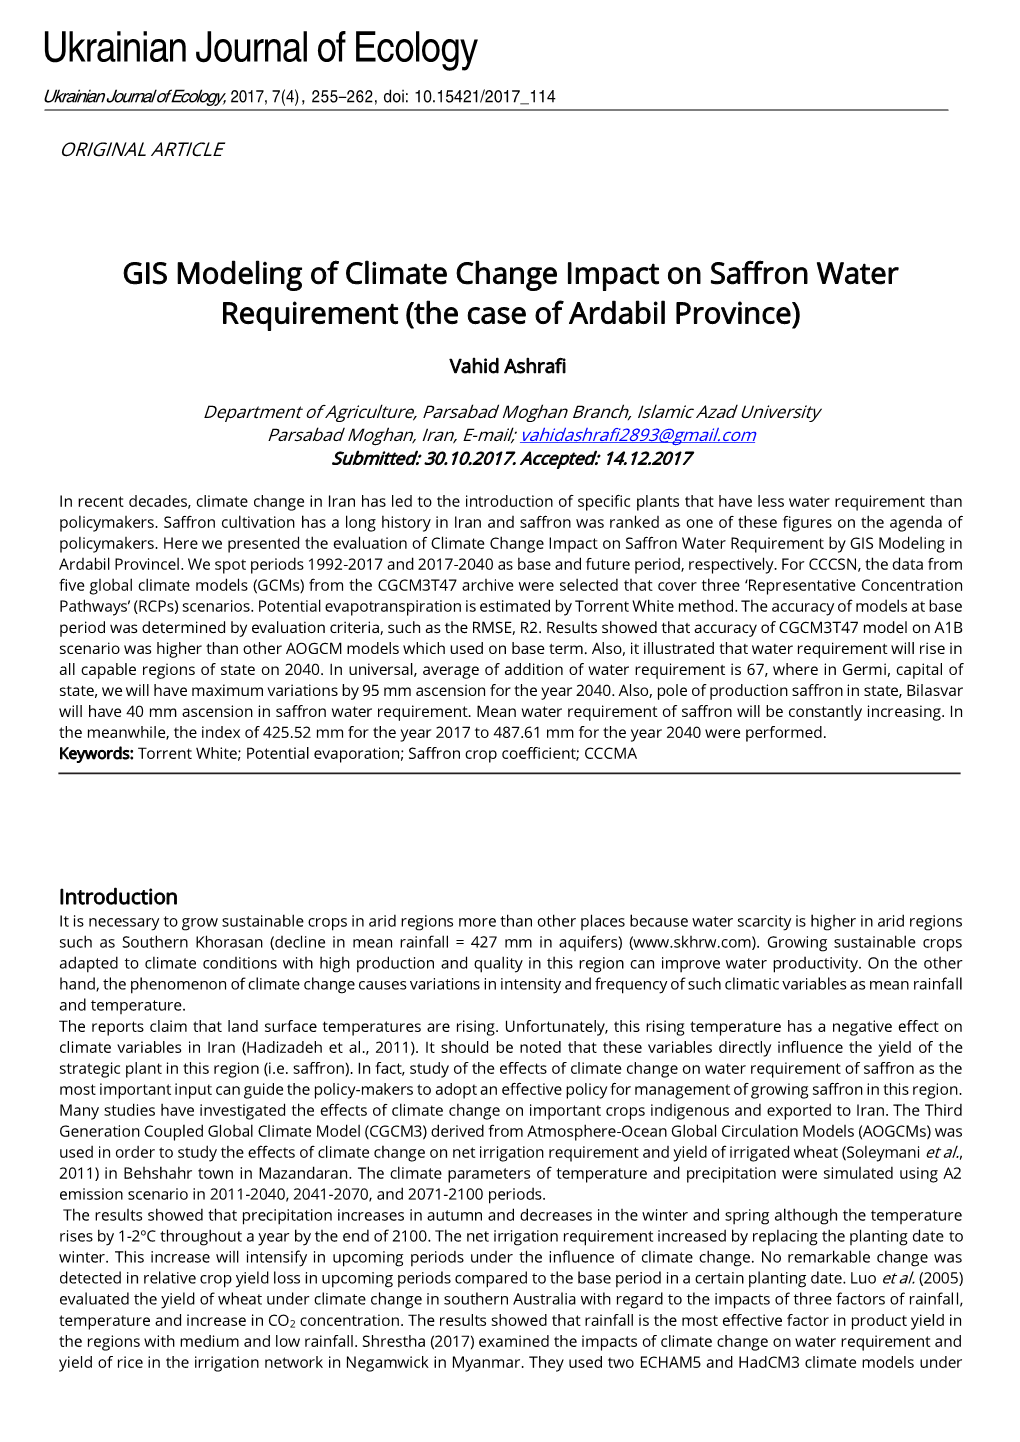 GIS Modeling of Climate Change Impact on Saffron Water Requirement (The Case of Ardabil Province)